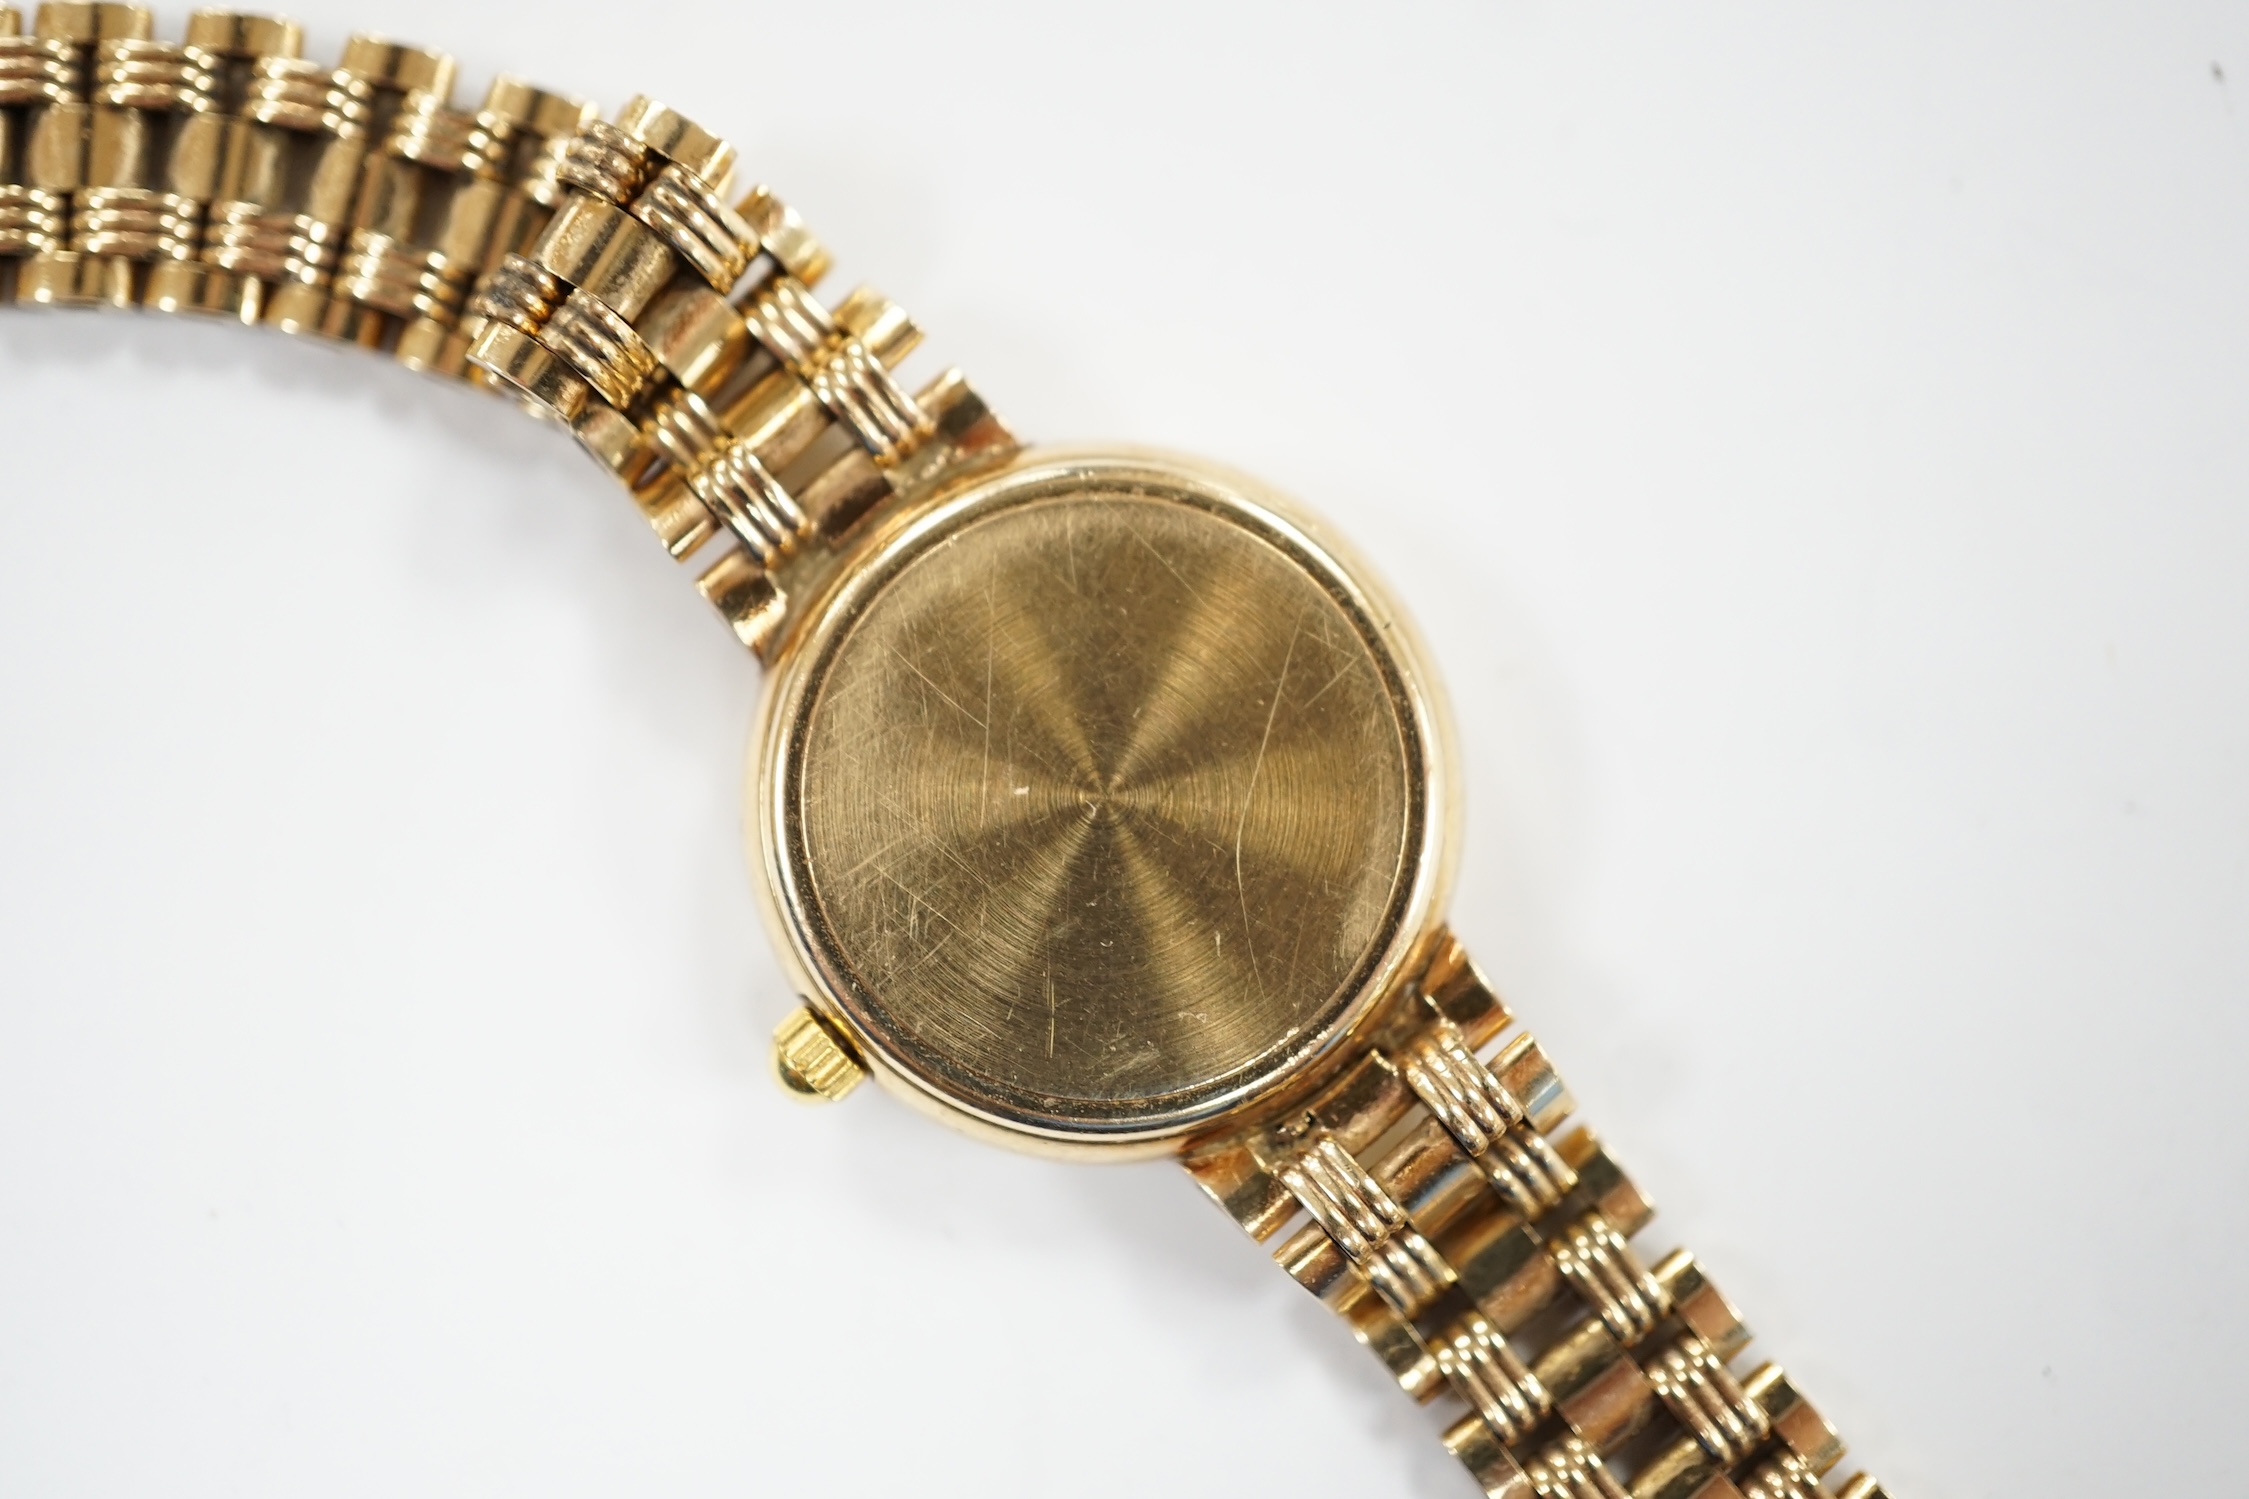 A lady's modern 9ct gold quartz bracelet wrist watch, retailed by Brufords, overall 17.7cm, gross weight 23.1 grams.